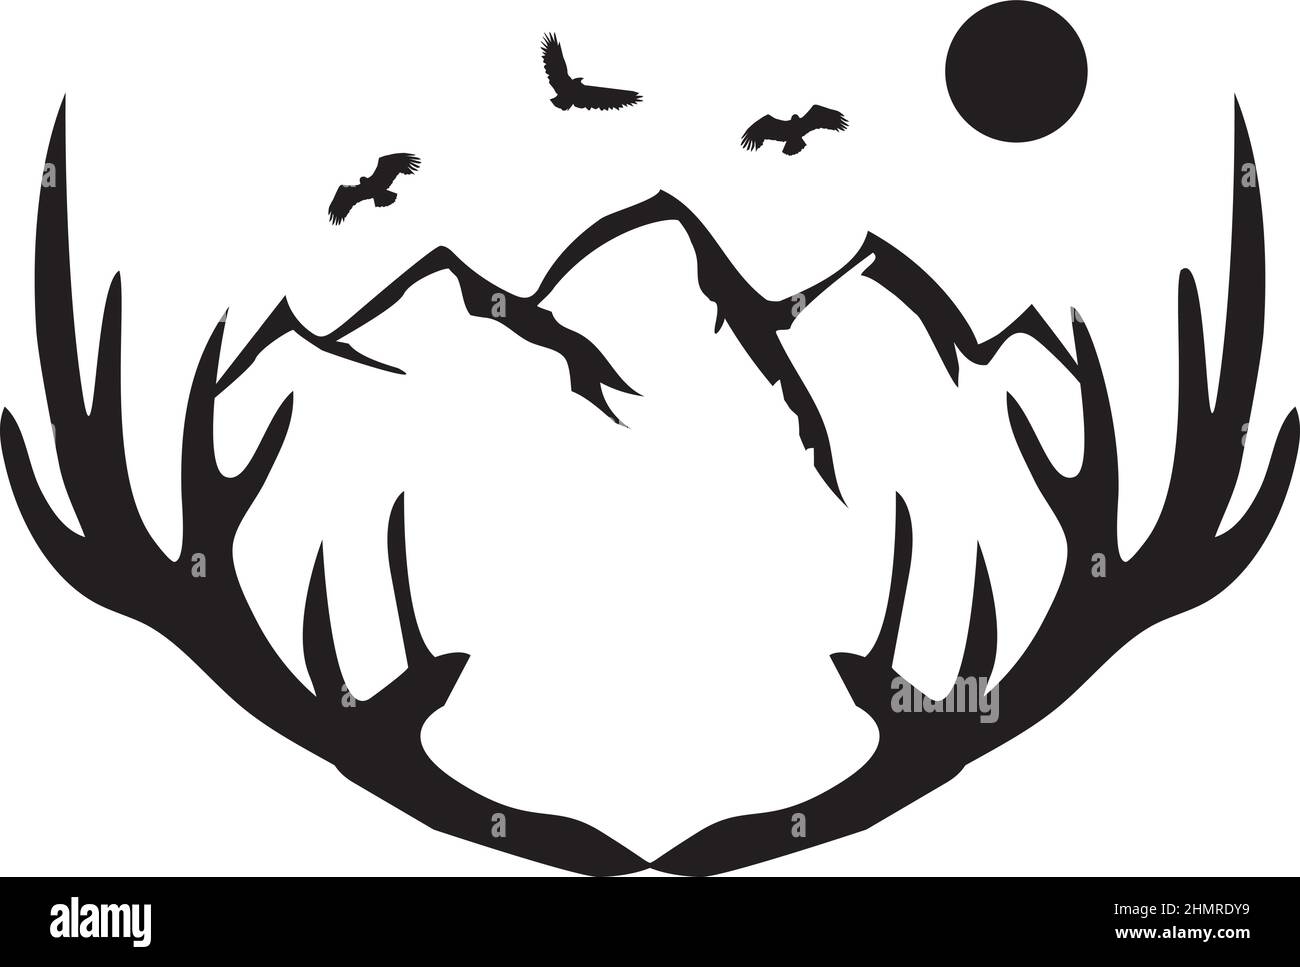 Vector Illustration of a deer antlers with mountains, eagles, moon. Stock Vector